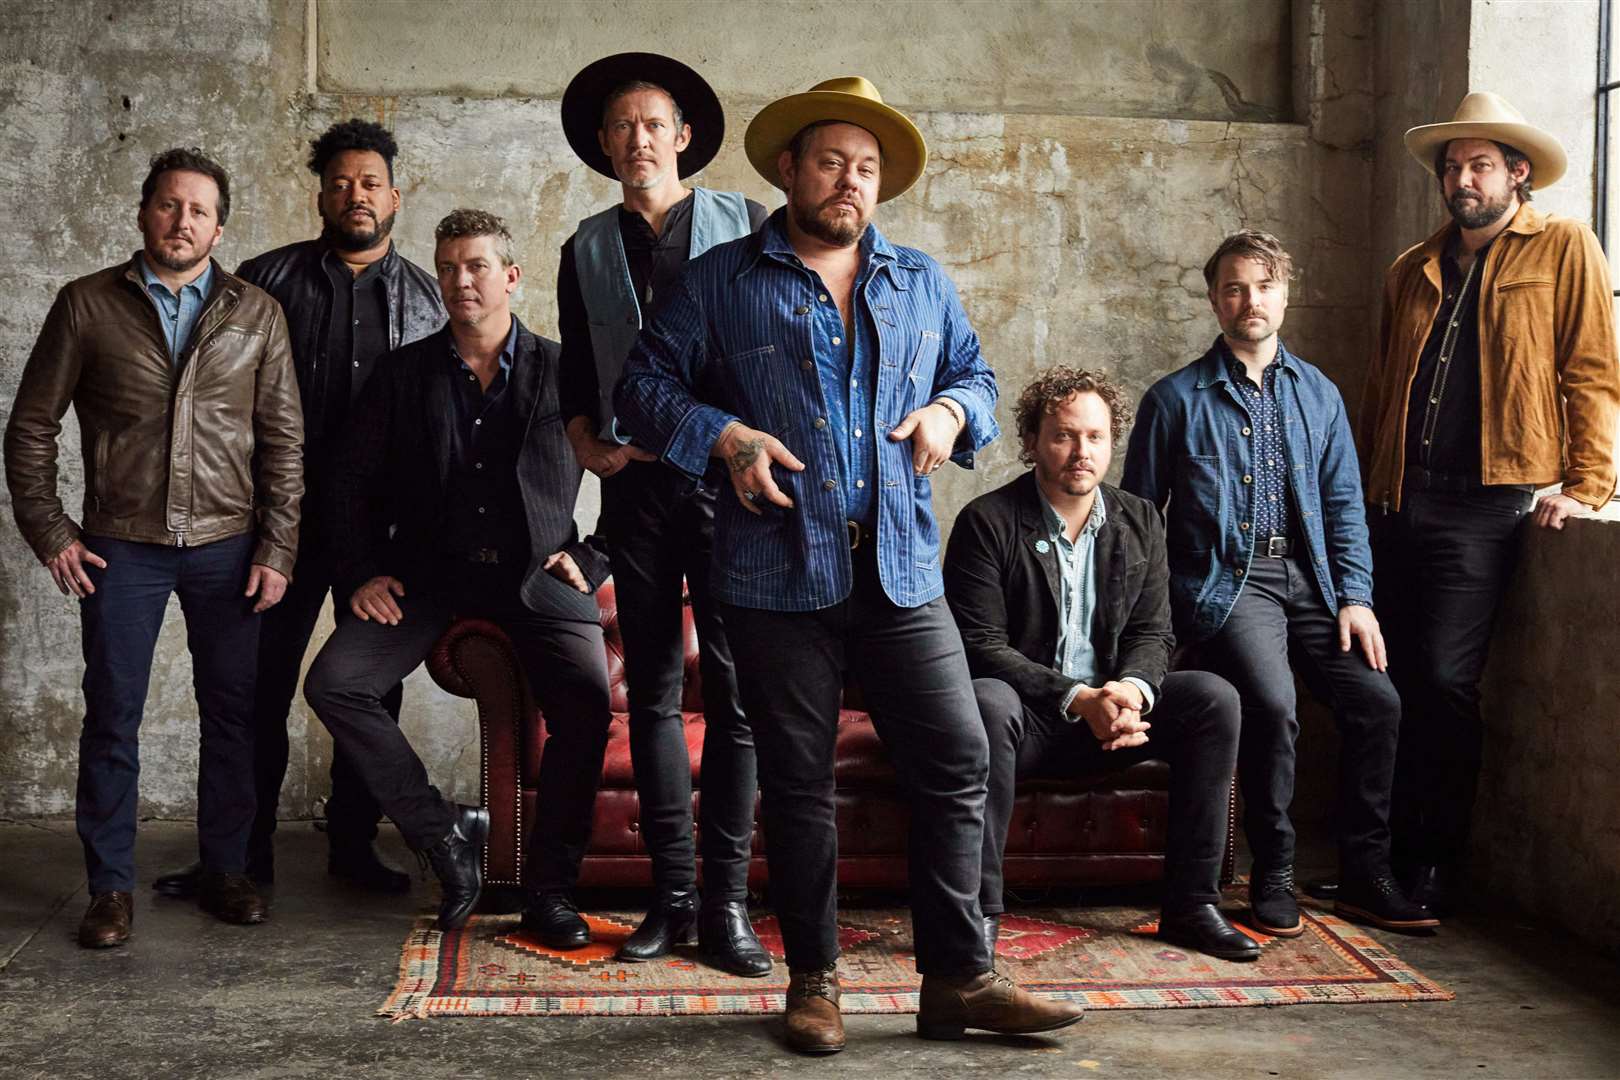 Nathaniel Rateliff & The Night Sweats are due to play Black Deer Festival. Images: Black Deer Festival